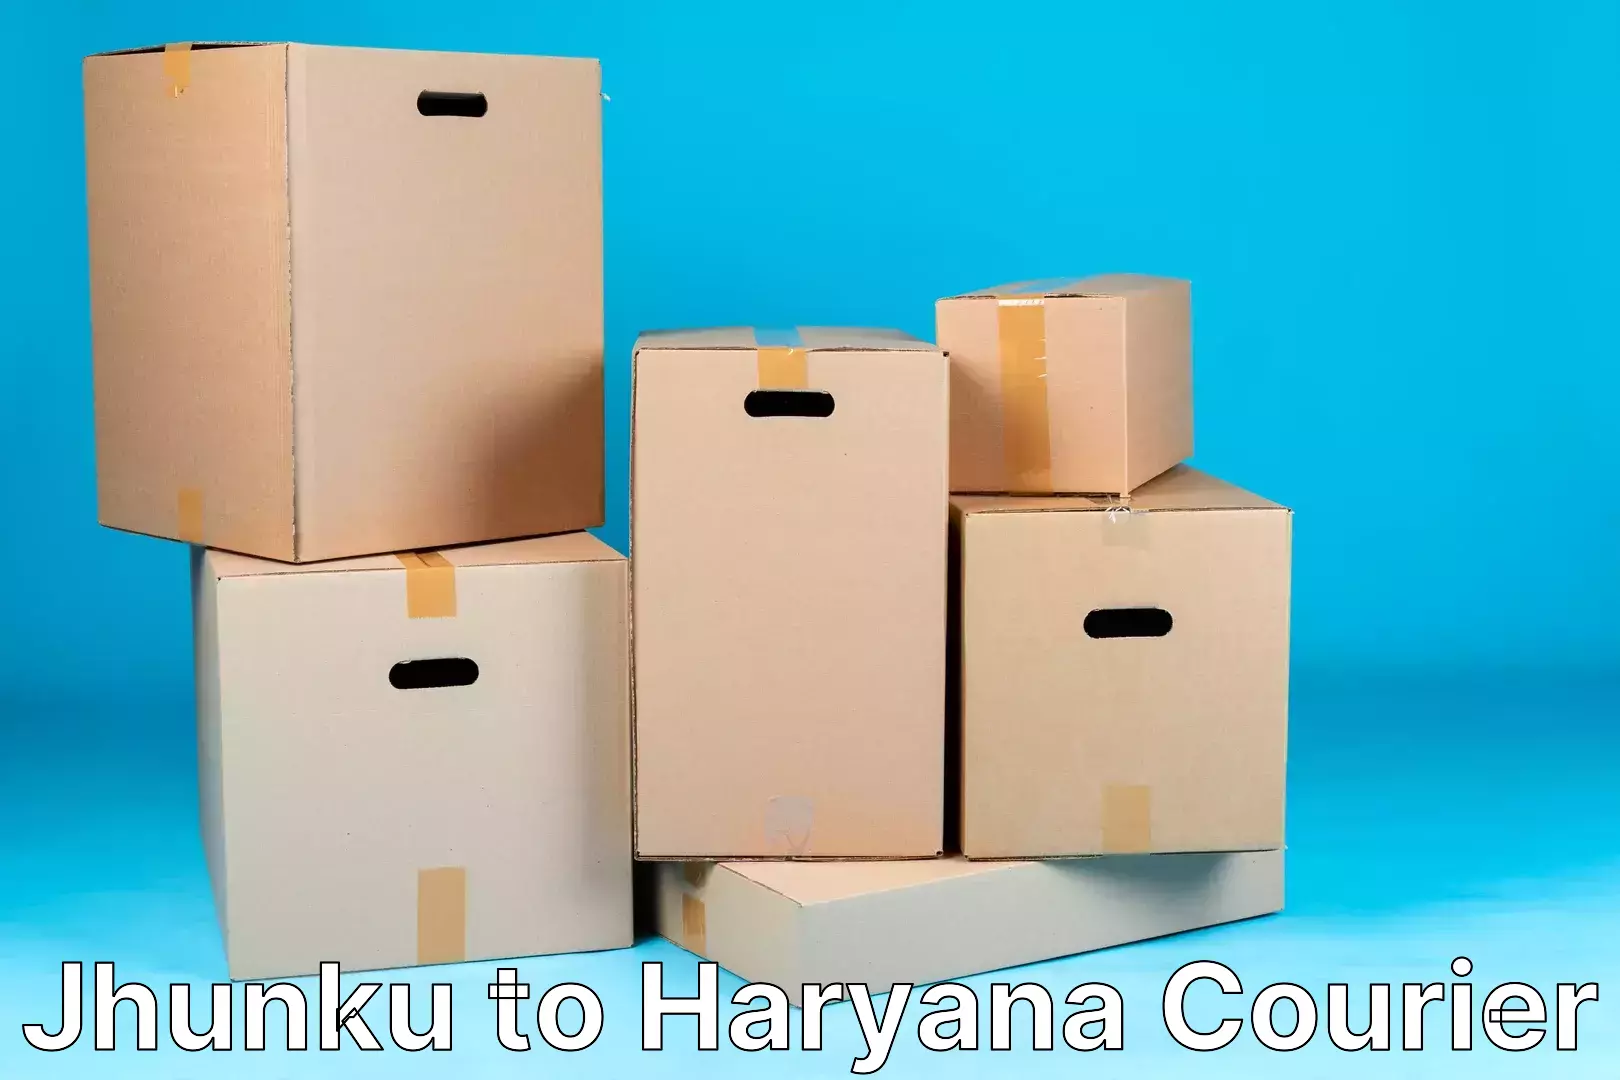 Expedited parcel delivery Jhunku to Haryana